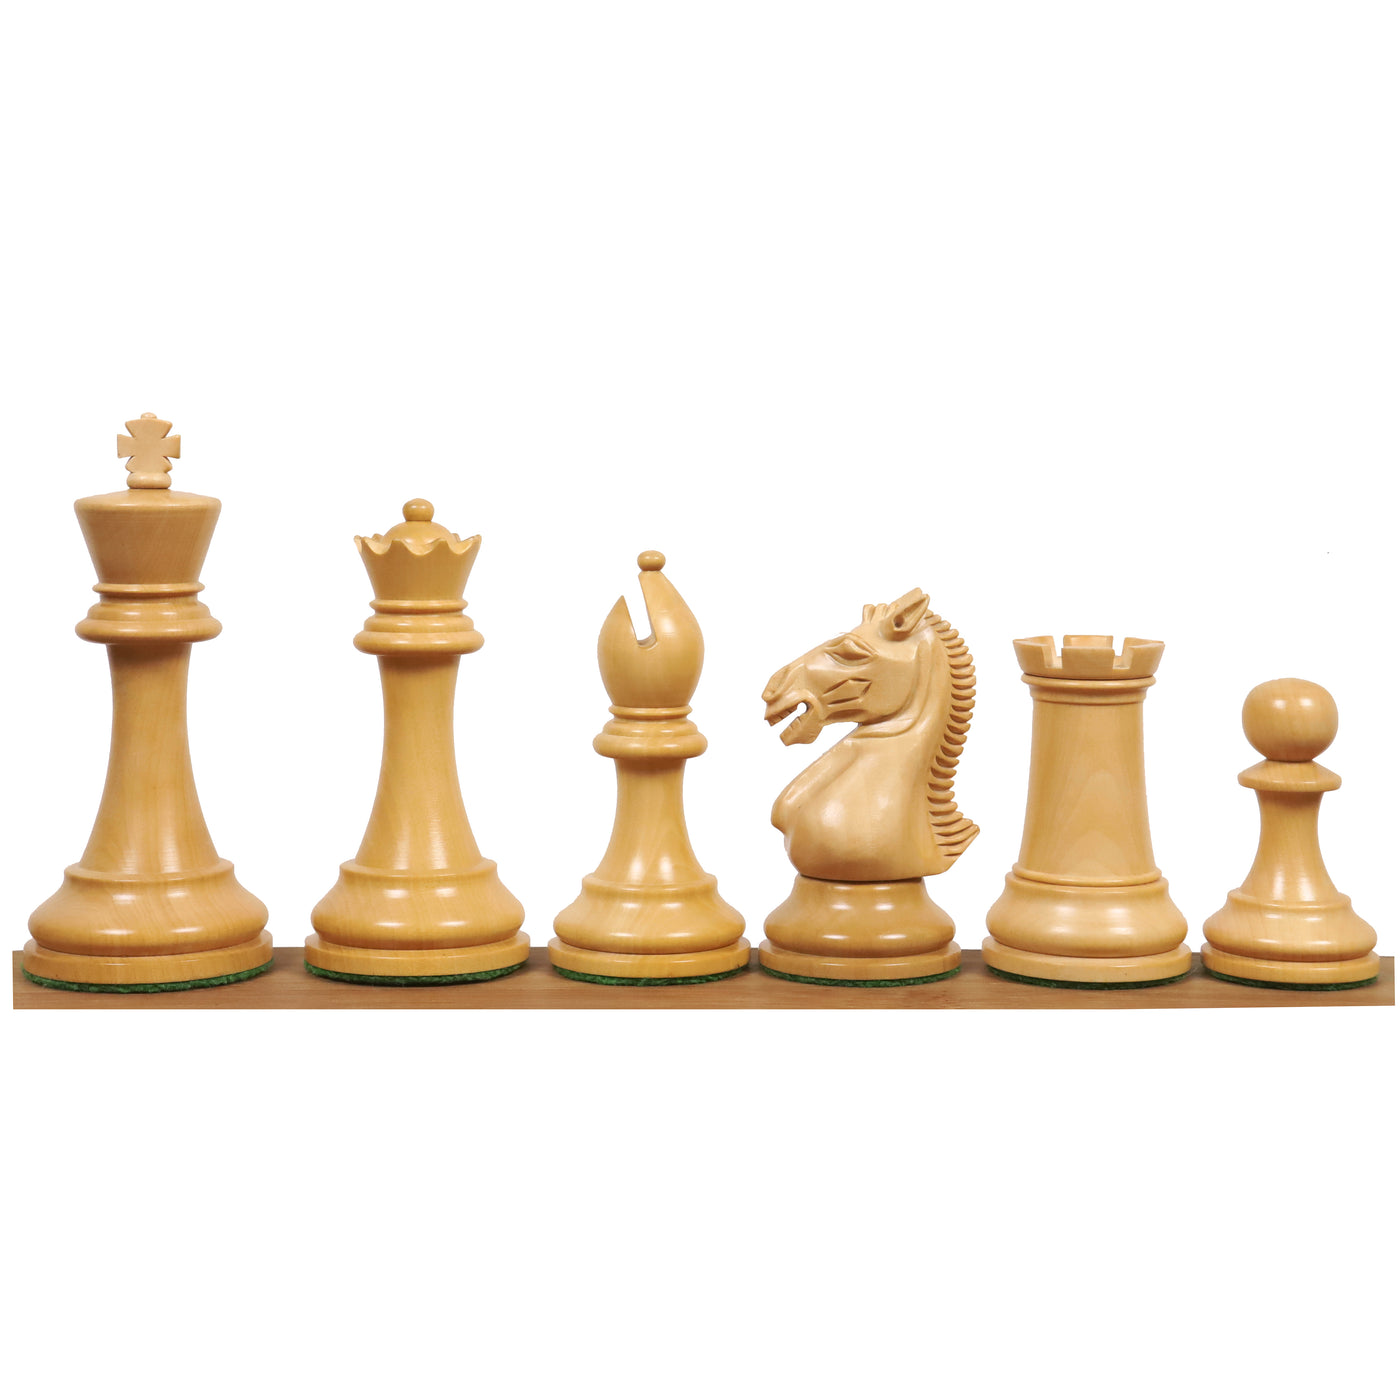 3.9" Hastings Series Staunton Ebony Wood Chess Pieces with 21" Large Solid Inlaid Ebony & Maple Wood Chess board and Leatherette Coffer Storage Box